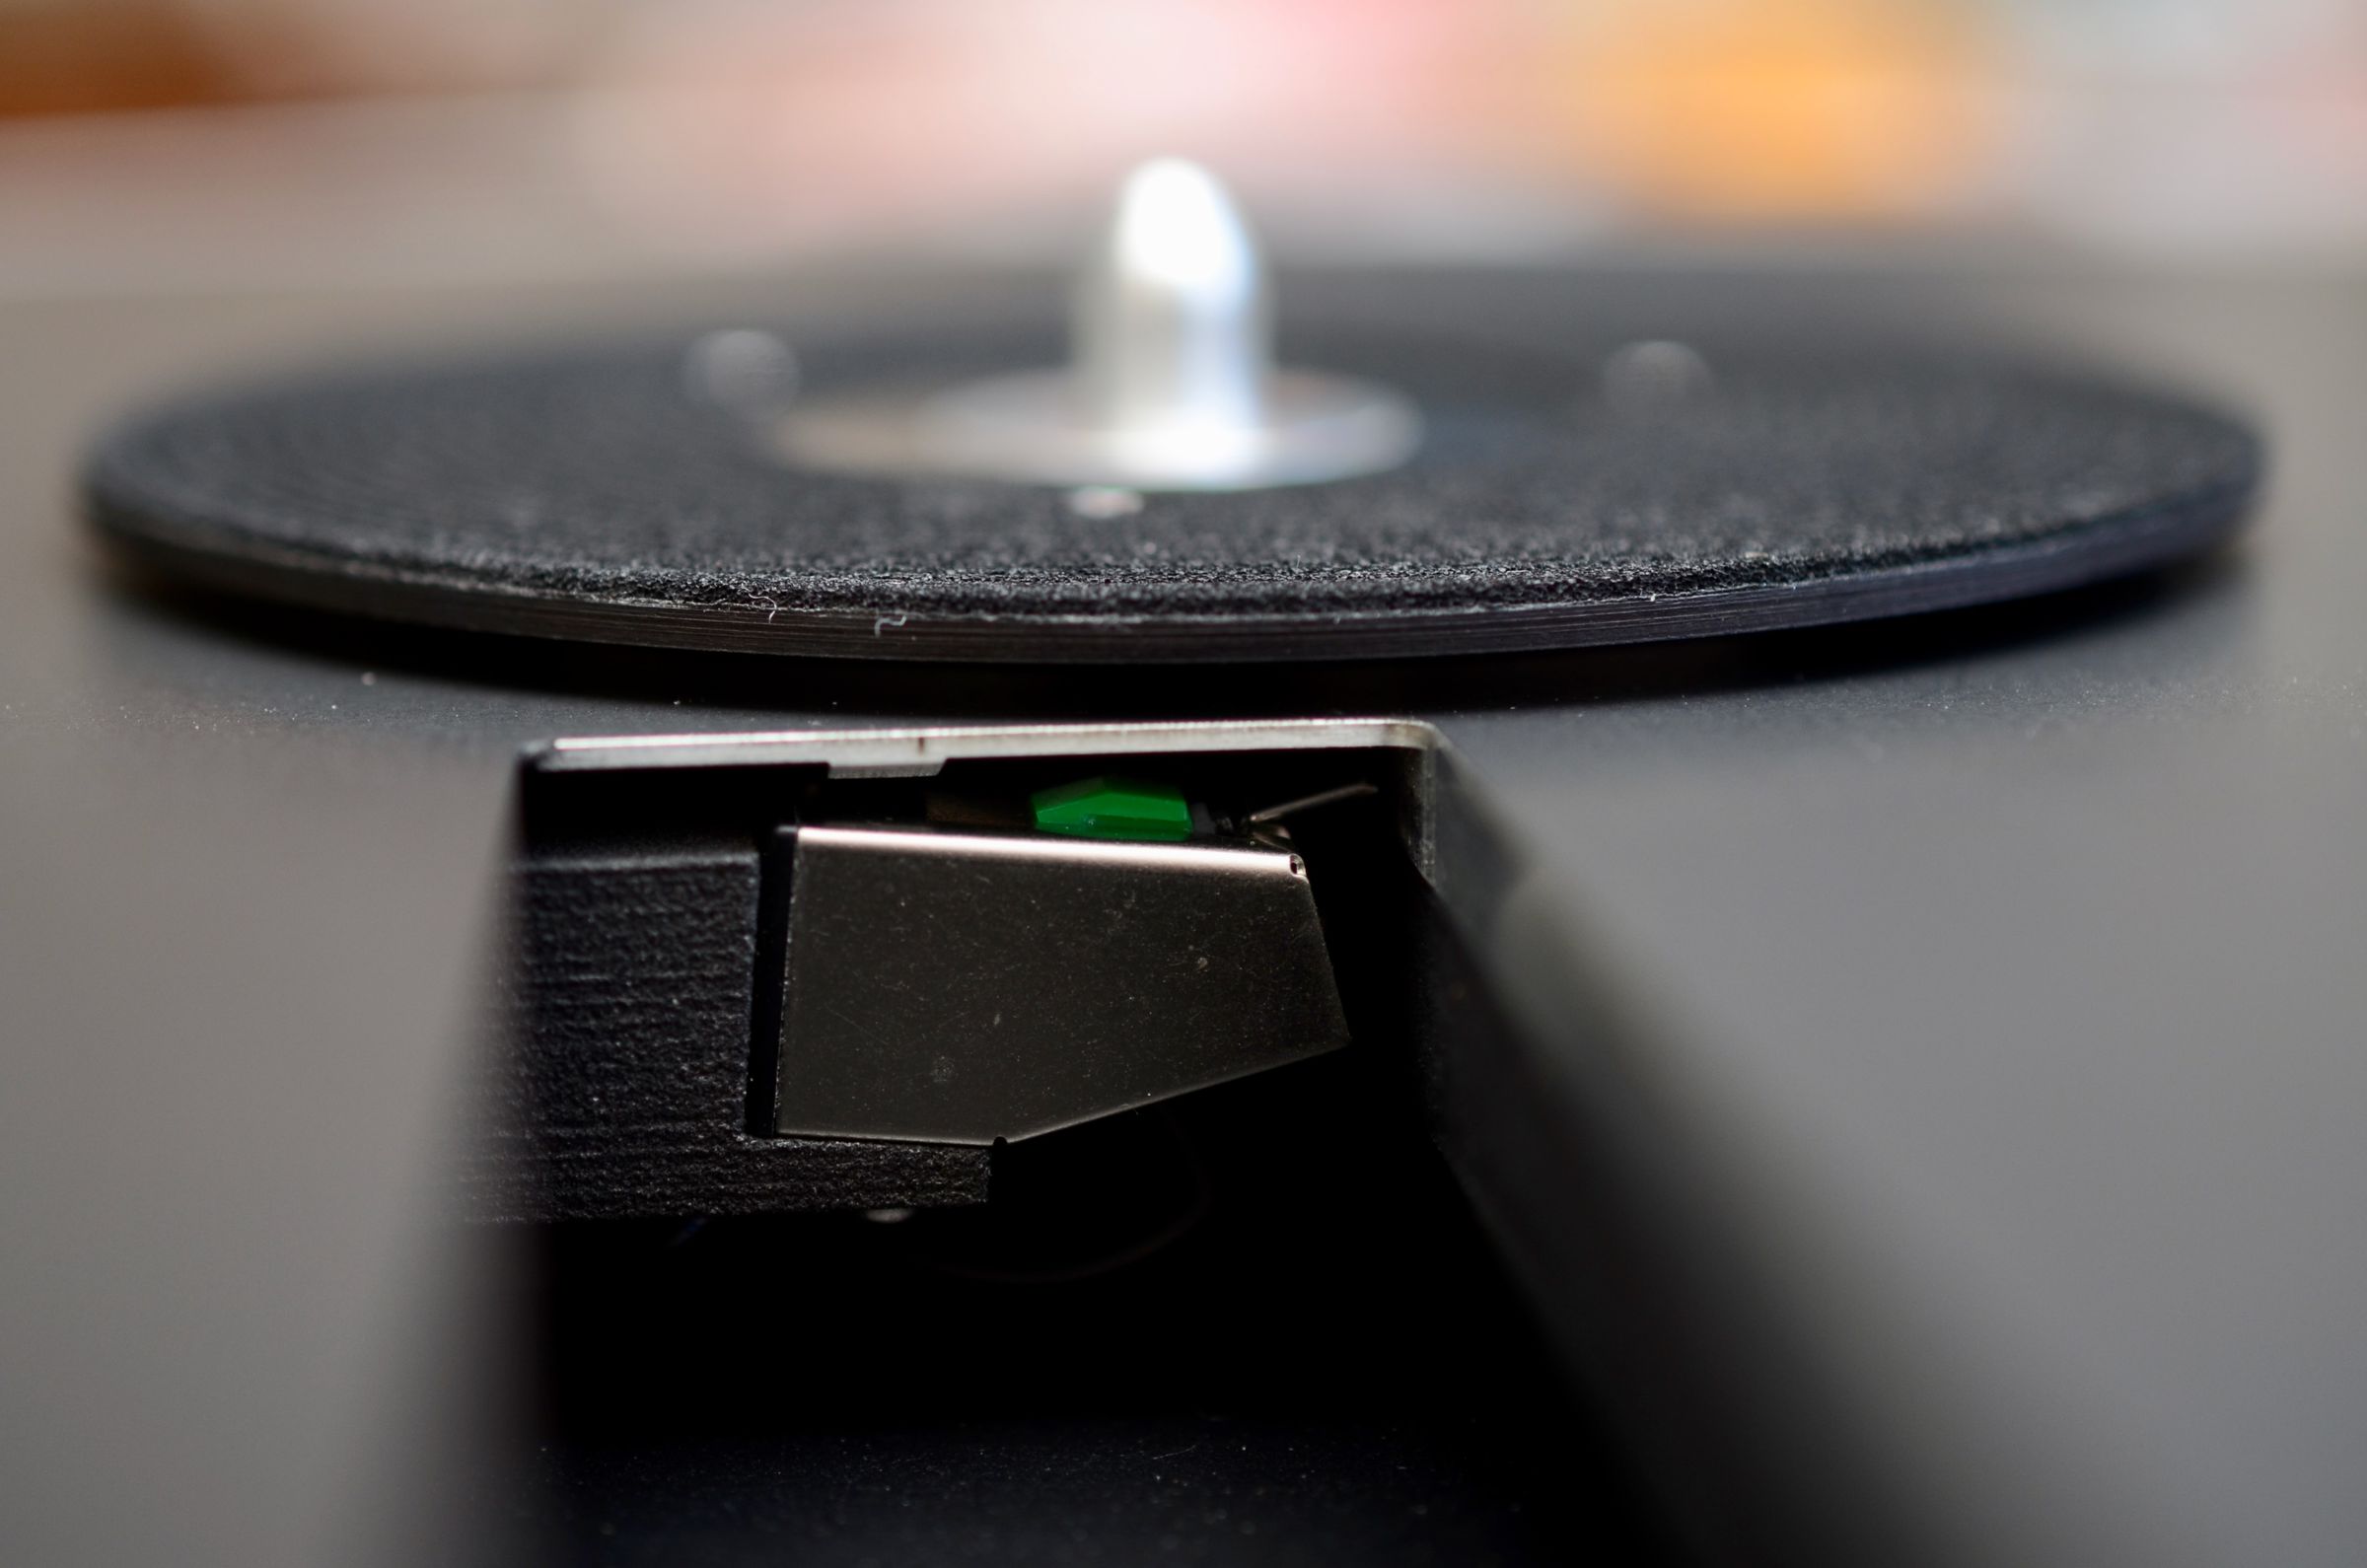 The tonearm in its parked position when the Wheel 2 is off.